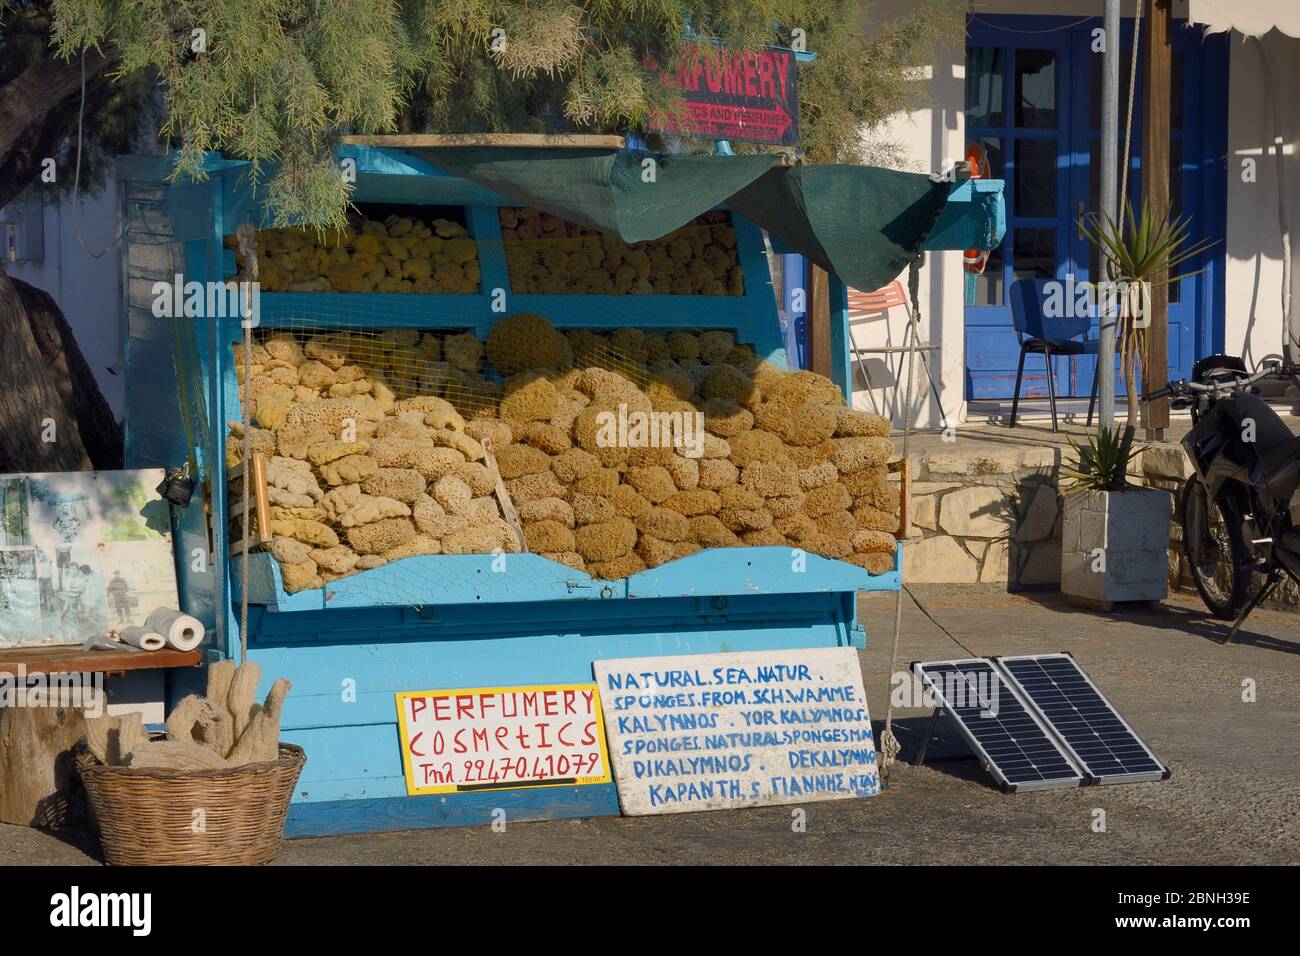 Sea sponges (Hippospongia / Spongia spp.) from Kalymnos for sale alongside loofahs in Lipsi Harbour, Lipsi, Dodecanese Islands, Greece, August 2013. Stock Photo